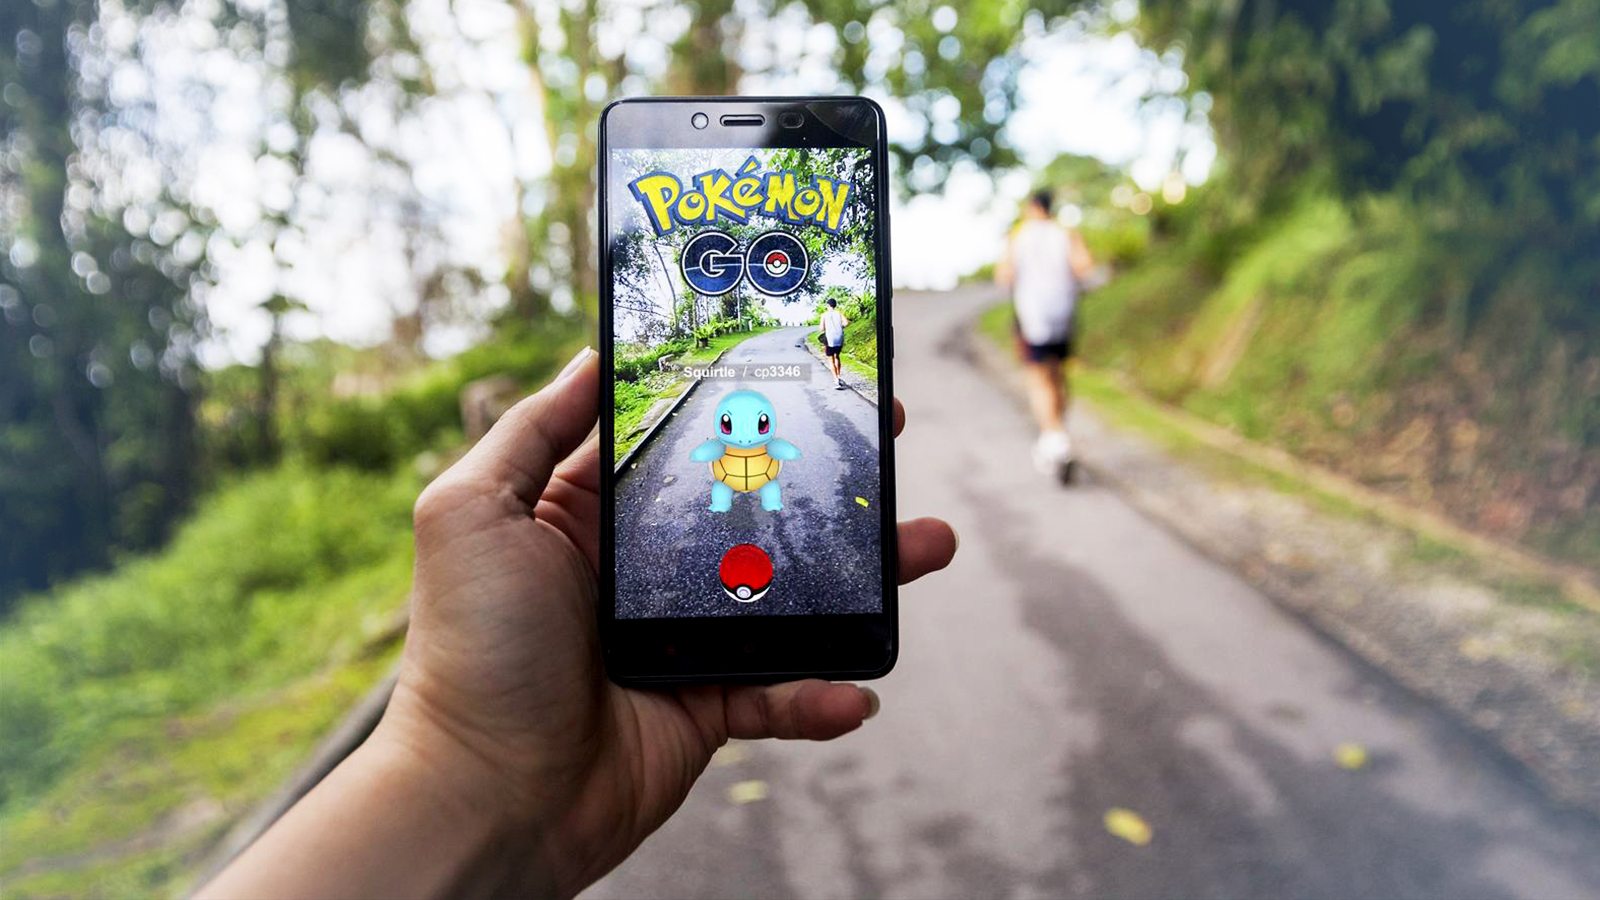 How Much Did It Cost To Create A Pokémon Go Type App Cubix